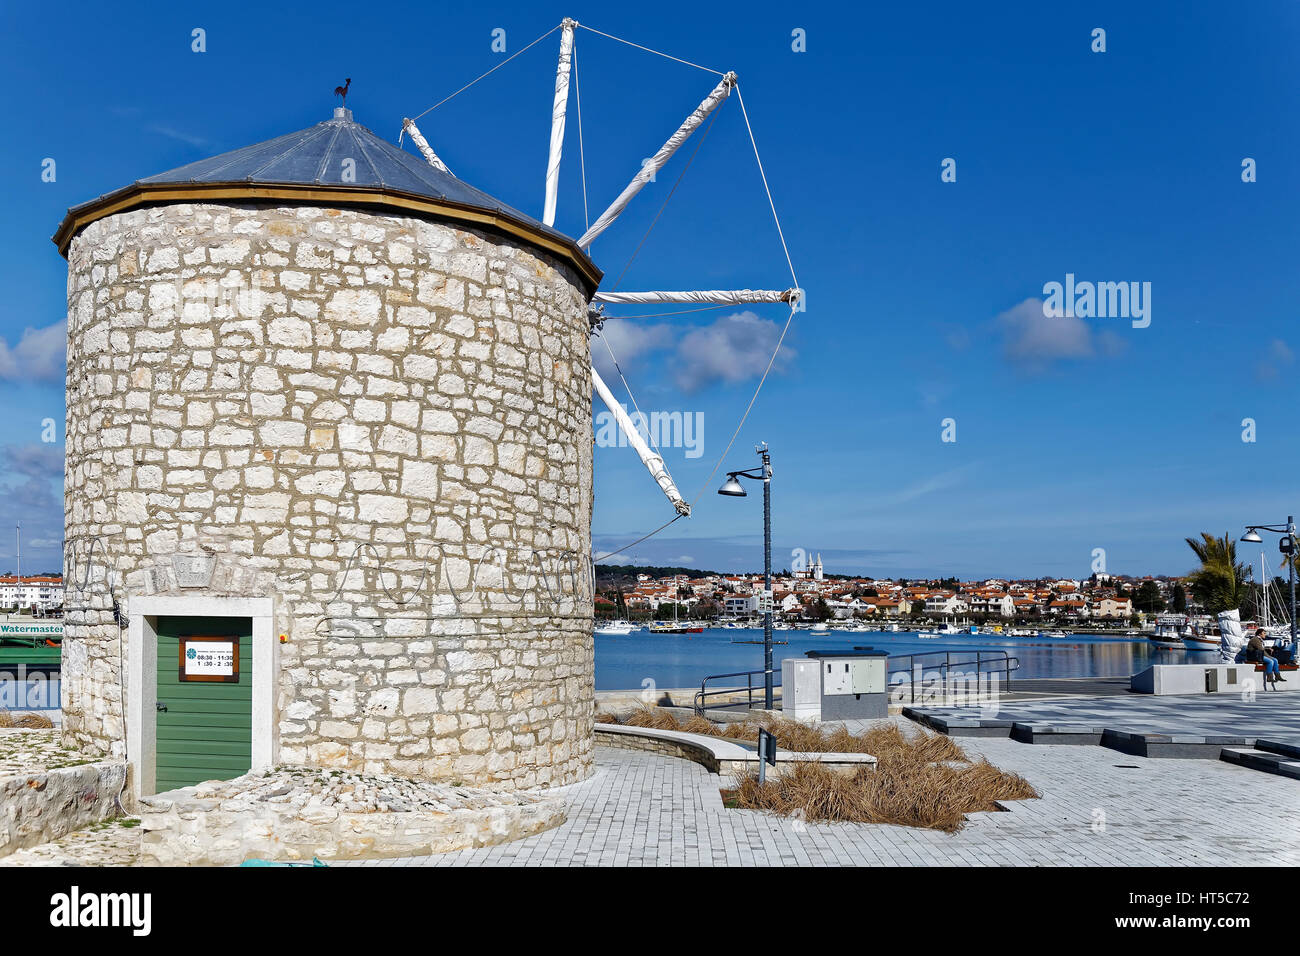 MEDULIN, CROATIA - MARCH 3, 2017: Wind mill, detail of Medulin, Croatian touristic place in early spring on March 3, 2017 Stock Photo